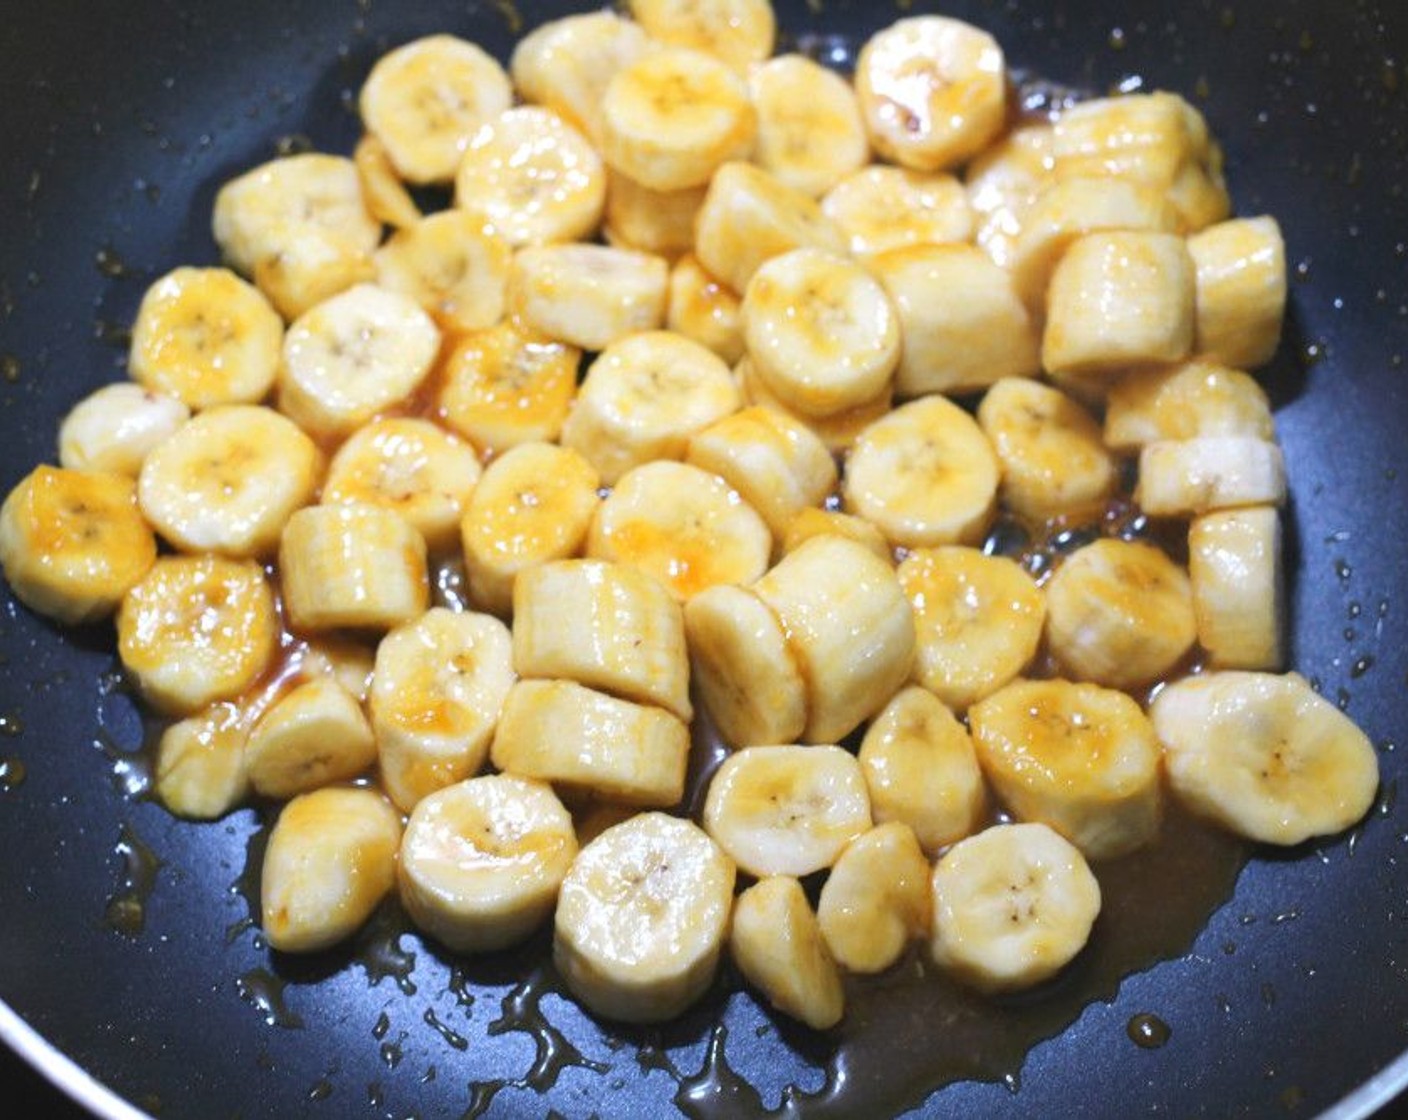 step 4 Add the cut bananas, stir until coated, and remove them from the heat.